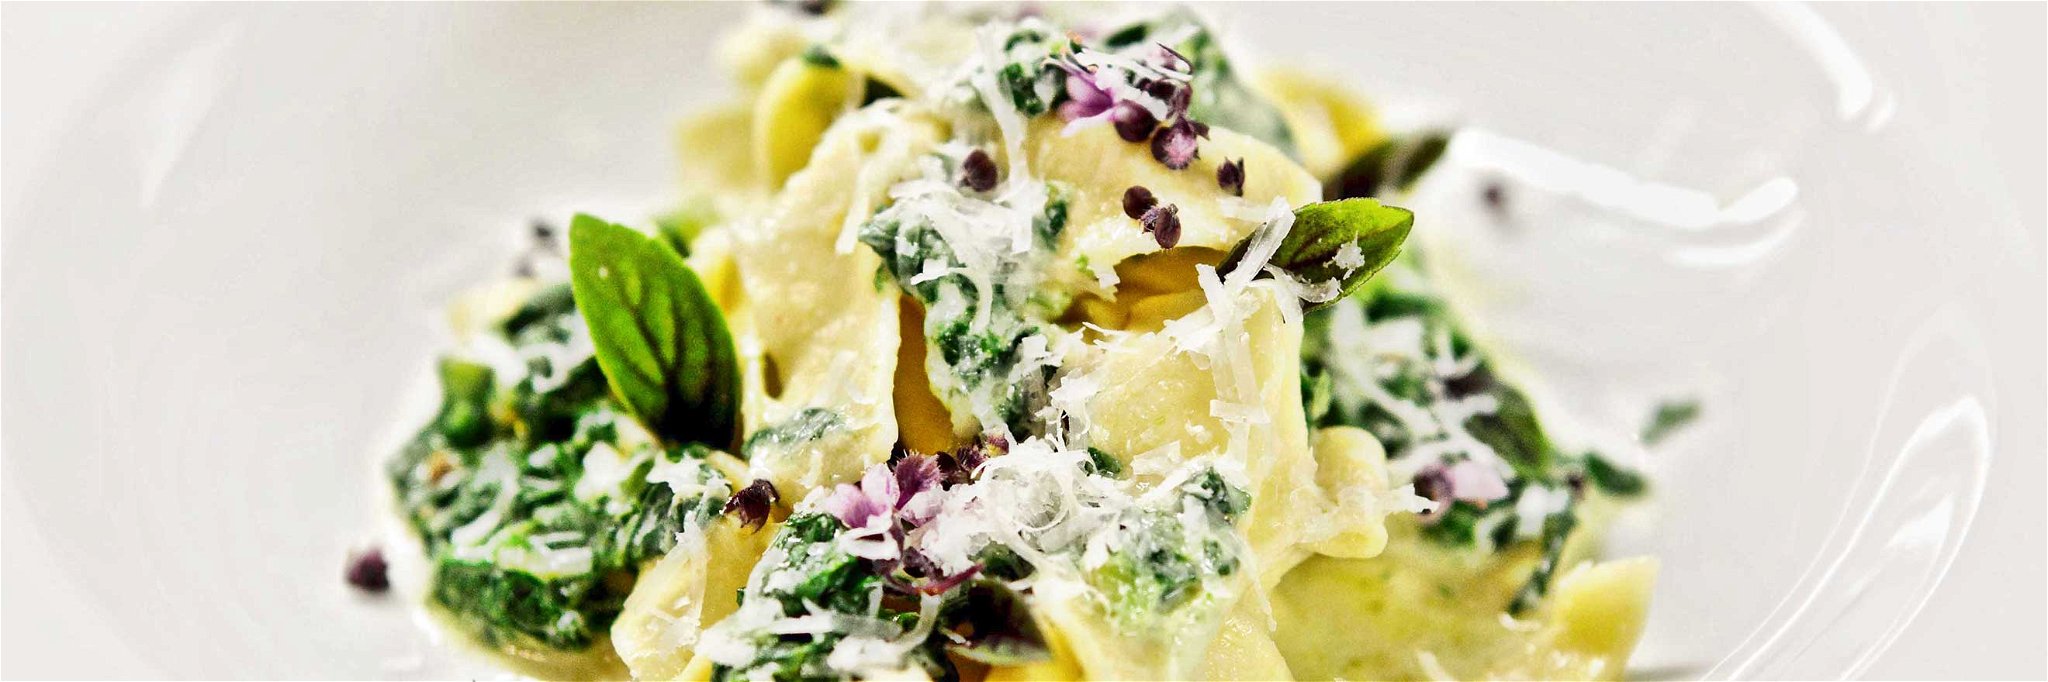 Pasta: Pappardelle with Mascarpone and Fresh Spinach